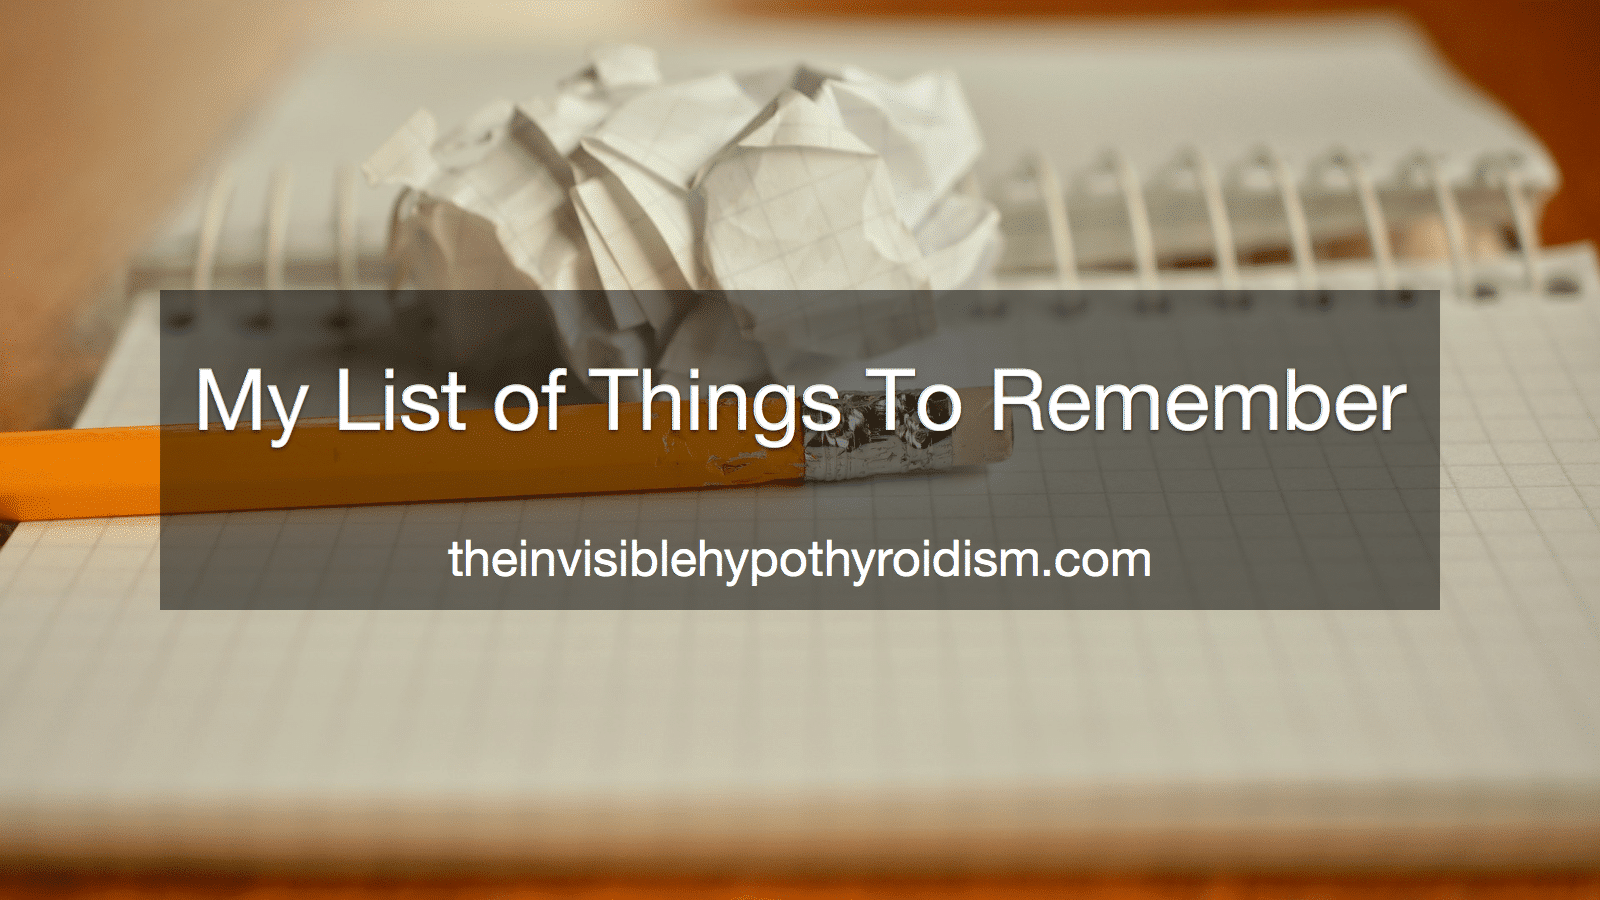 My List of Things To Remember